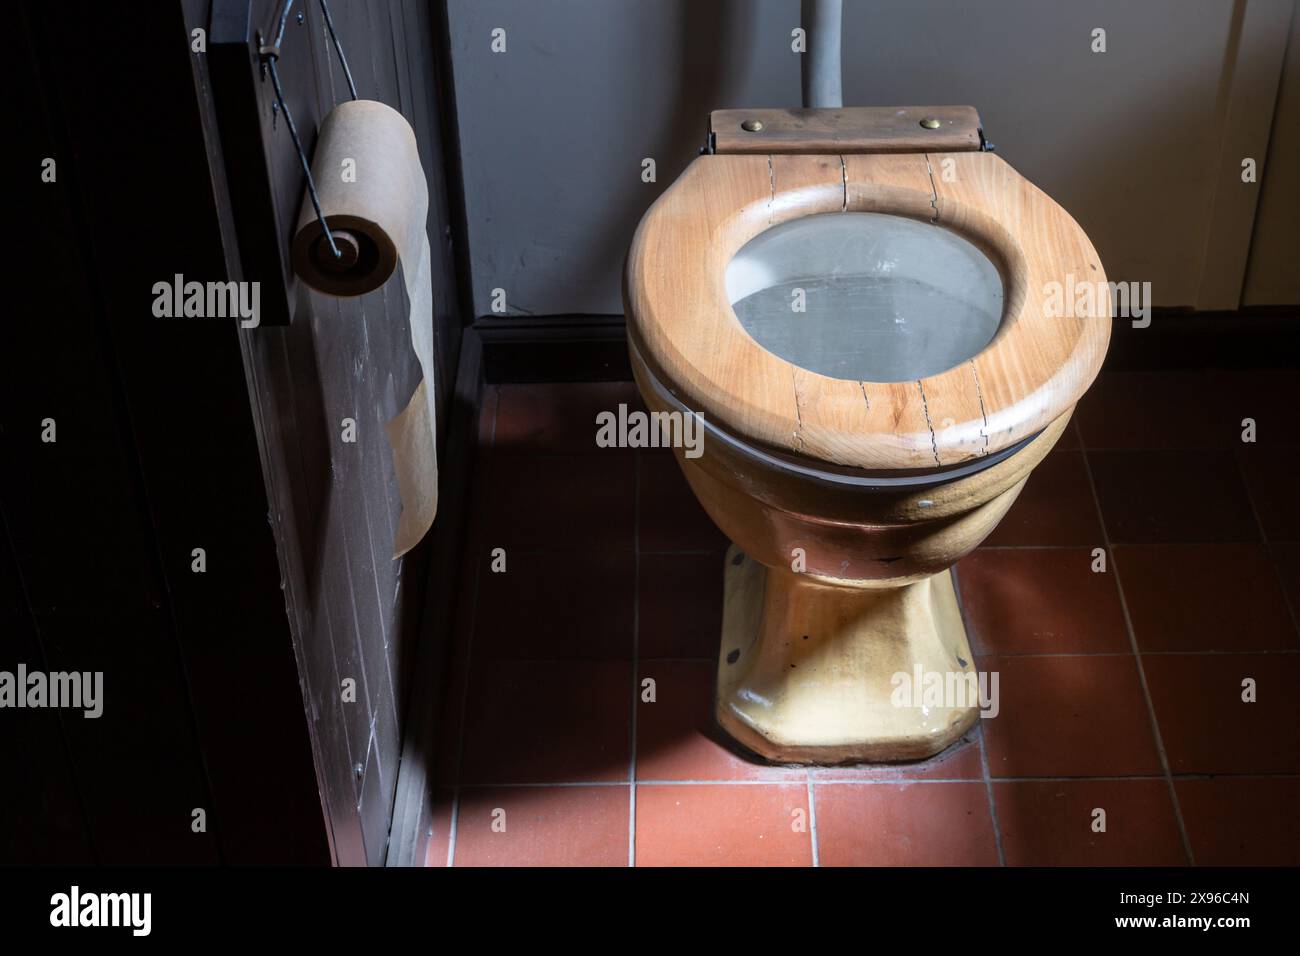 Old mid twentieth century toilet or lavatory and paper roll, UK. Stock Photo